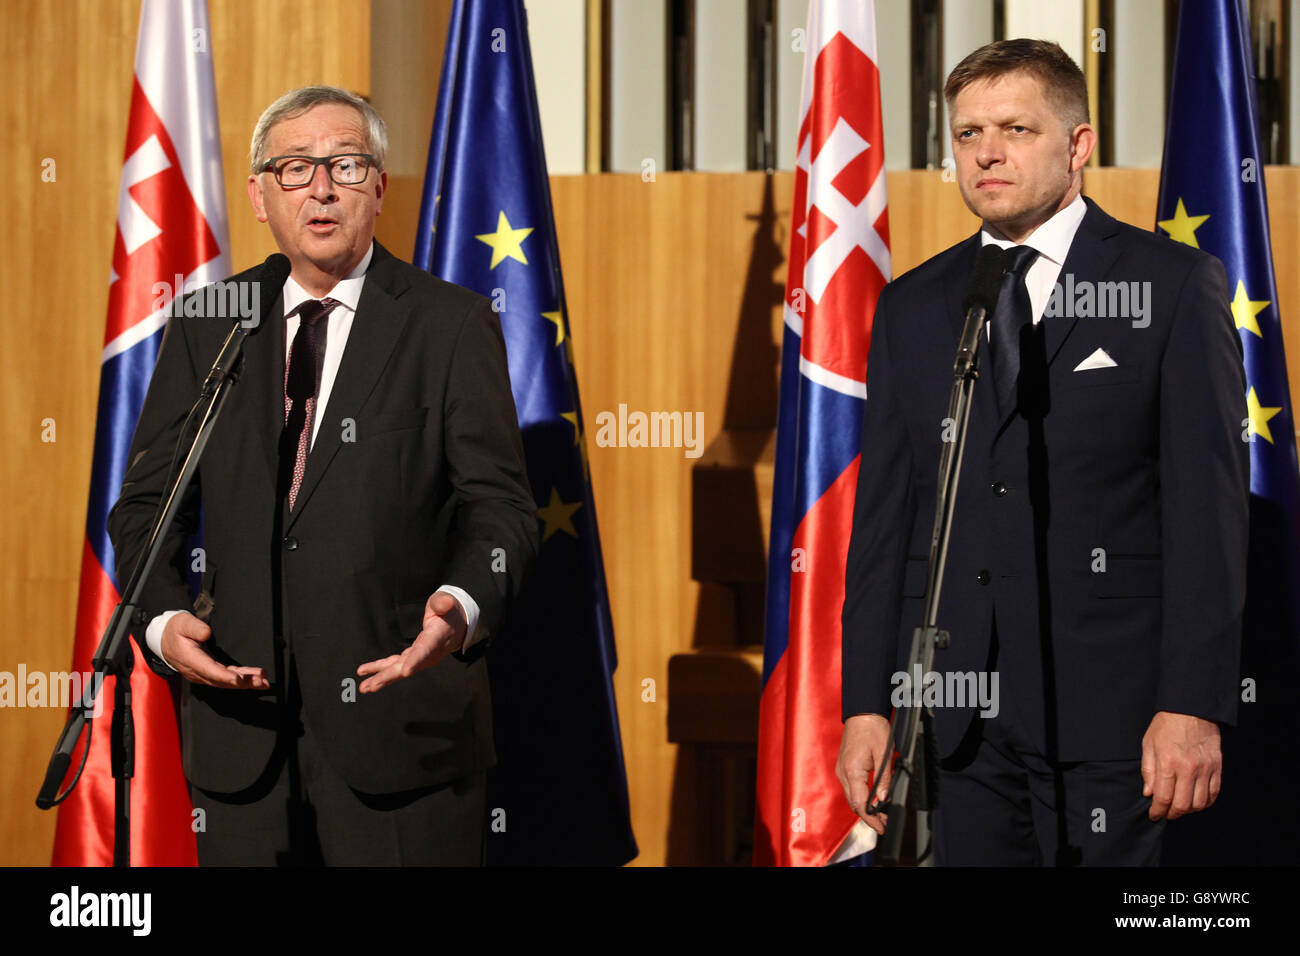 Bratislava, Slovak Prime Minister Robert Fico in Bratislava. 30th June, 2016. European Commission President Jean-Claude Juncker(L) gives a speech at the Bratislava Castle, accompanied by Slovak Prime Minister Robert Fico in Bratislava, capital of Slovakia on June 30, 2016. During its presidency of the European Union(EU) Council, Slovakia wants to focus first and foremost on a positive EU agenda and bring the bloc closer to people, Slovak Prime Minister Robert Fico said here on Thursday. © Andrej Klizan/Xinhua/Alamy Live News Stock Photo